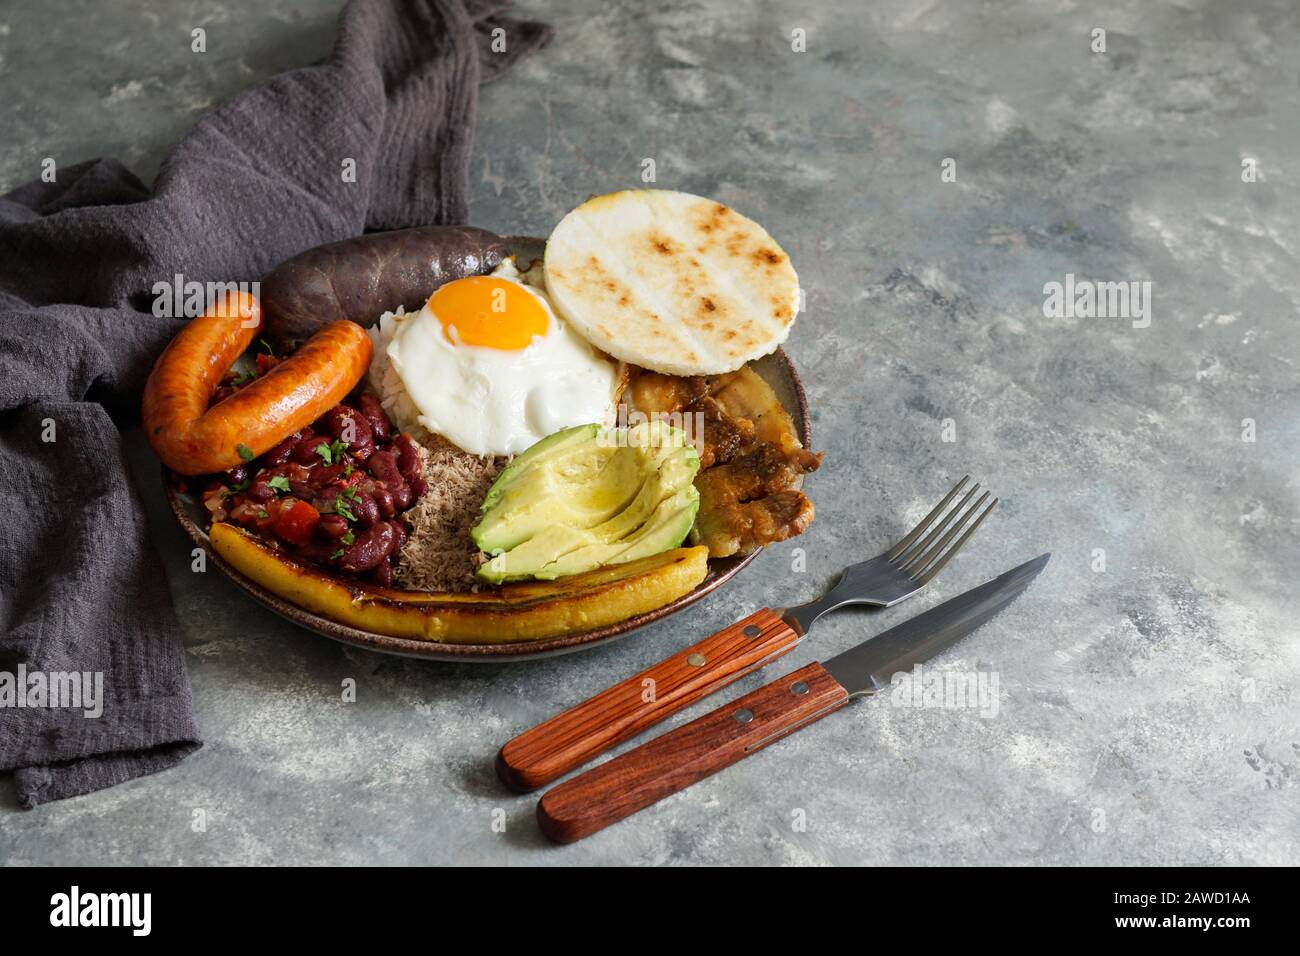 Colombian food. Bandeja paisa, typical dish at the Antioquia region of Colombia - chicharron (fried pork belly), black pudding, sausage, arepa, beans, Stock Photo